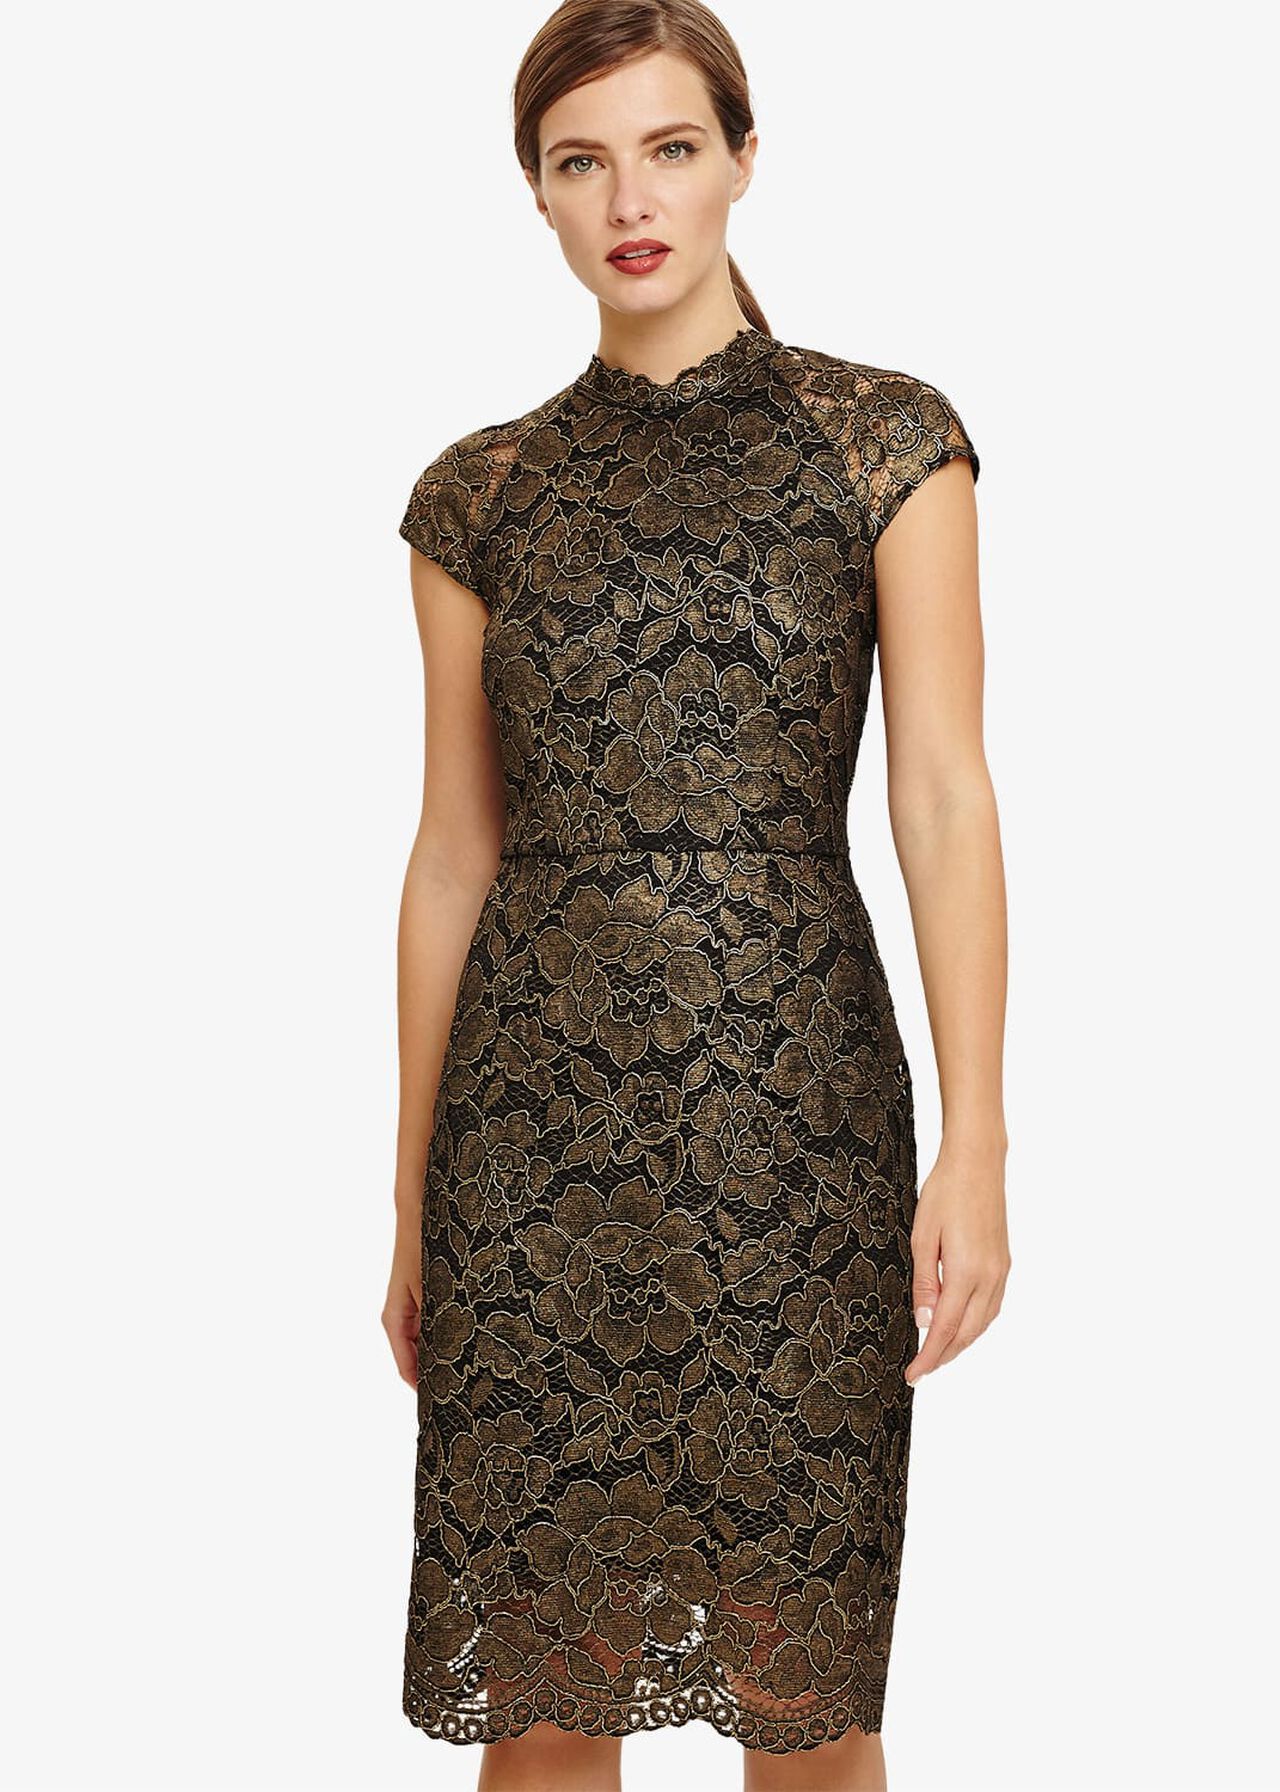 Janie Metallic Corded Lace Dress | Phase Eight